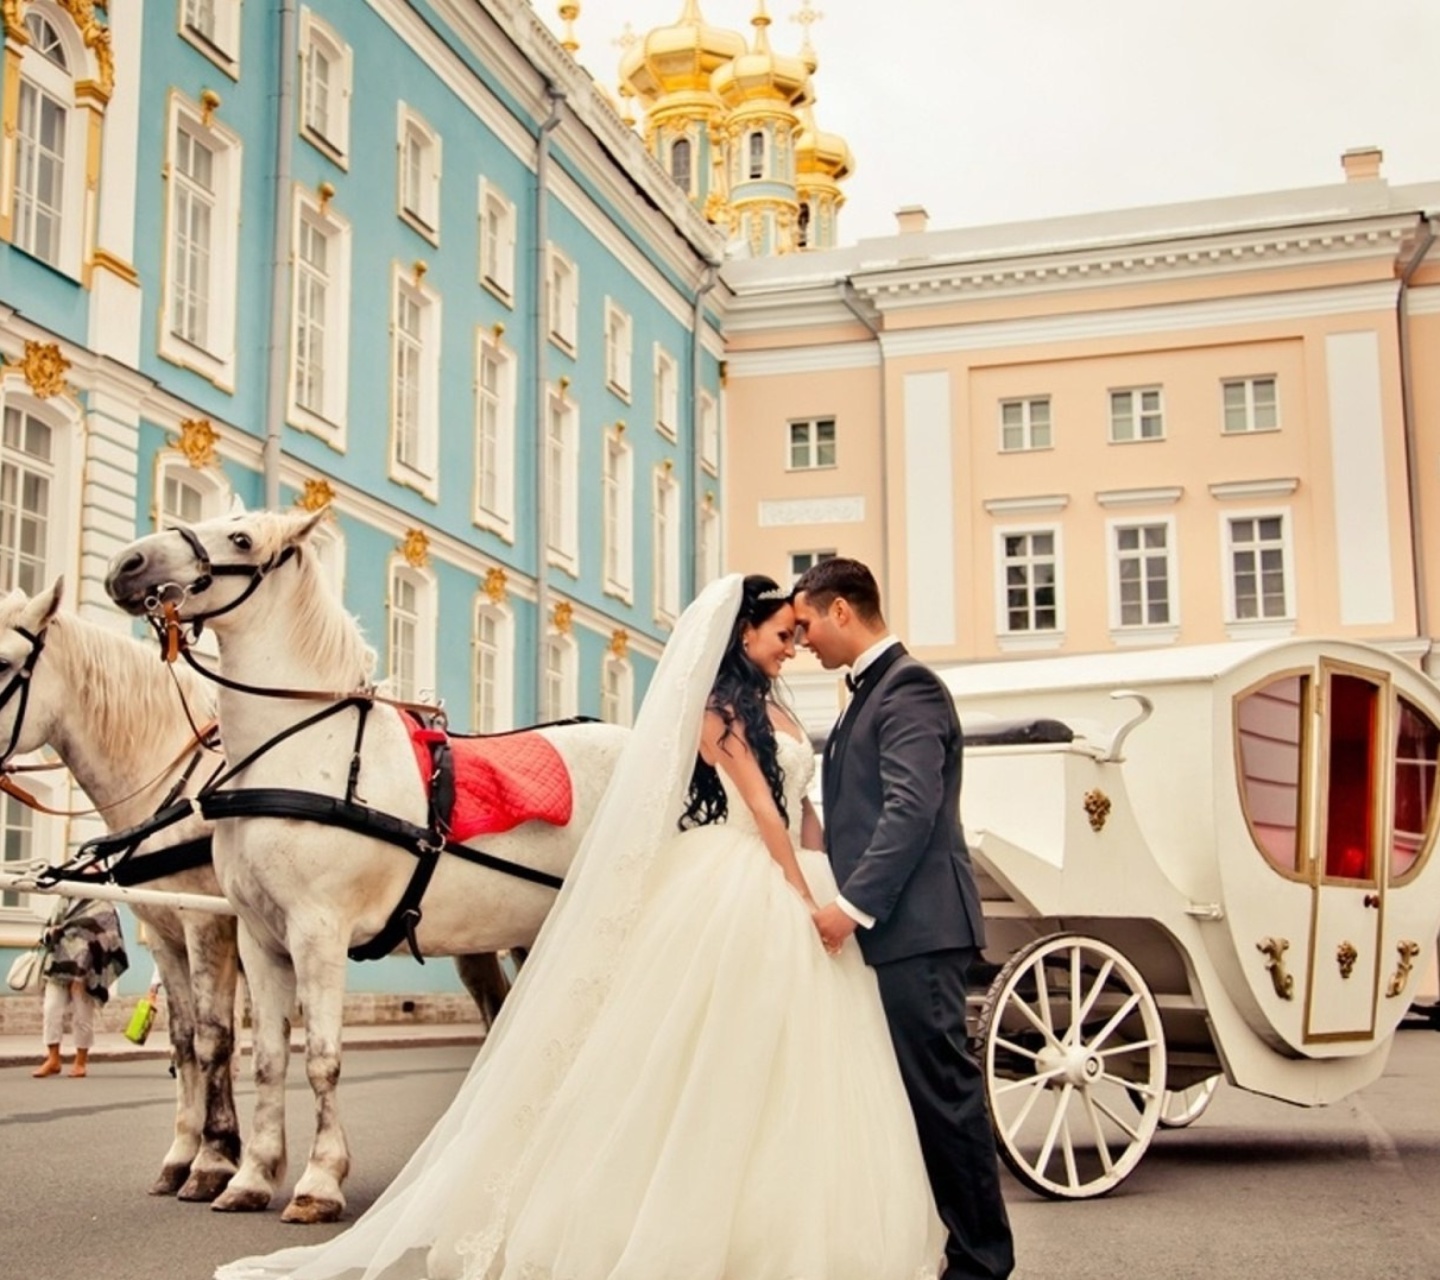 Wedding in carriage wallpaper 1440x1280